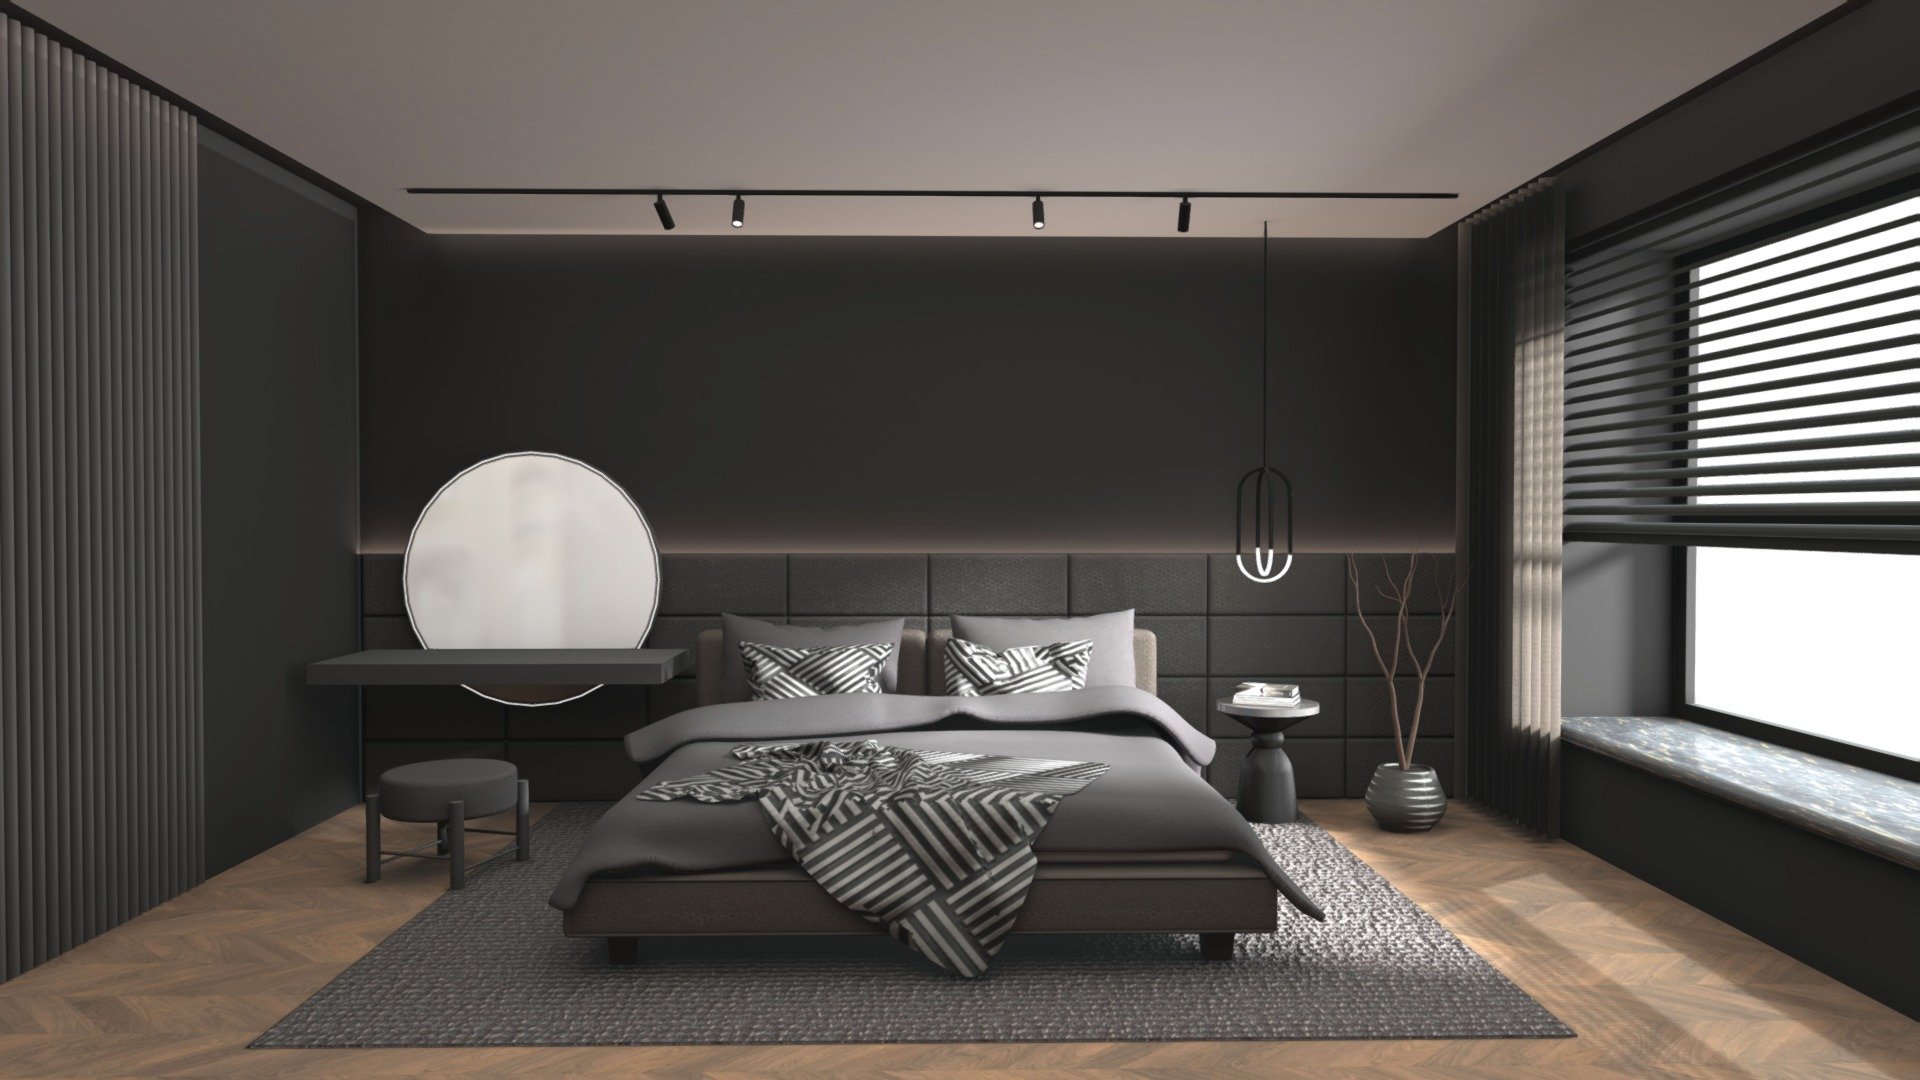 This is a bedroom in a modern apartment.
Big windows, comfy beds. A small dresser next to the bed.
The darker tone of entire room makes it easy to immerse yourself in sleep and get a good rest.
Textures baked 3d model